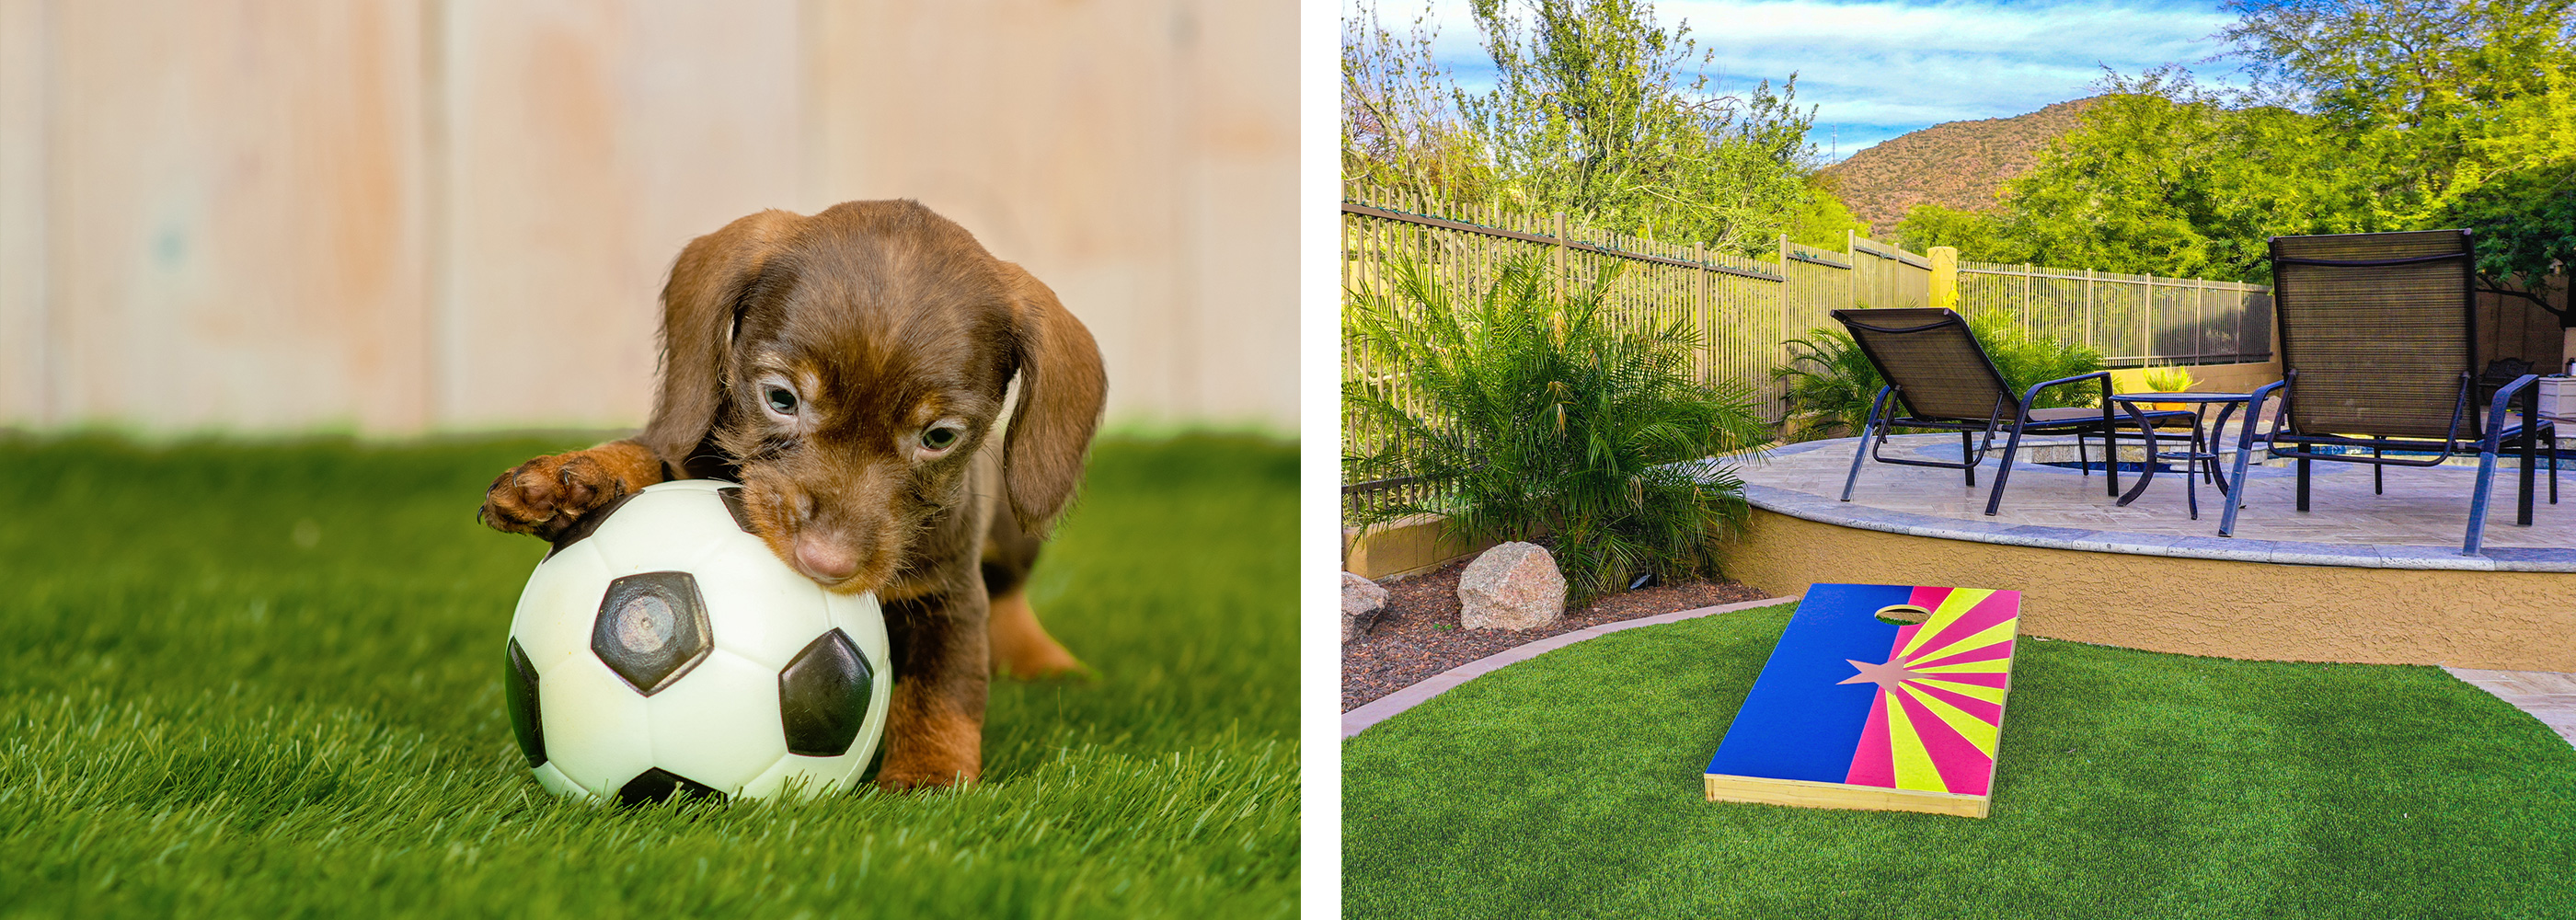 A puppy playing with a small soccer ball on a lawn, and a backyard with a cornhole game, loungers, a small pool, plants and a fence.